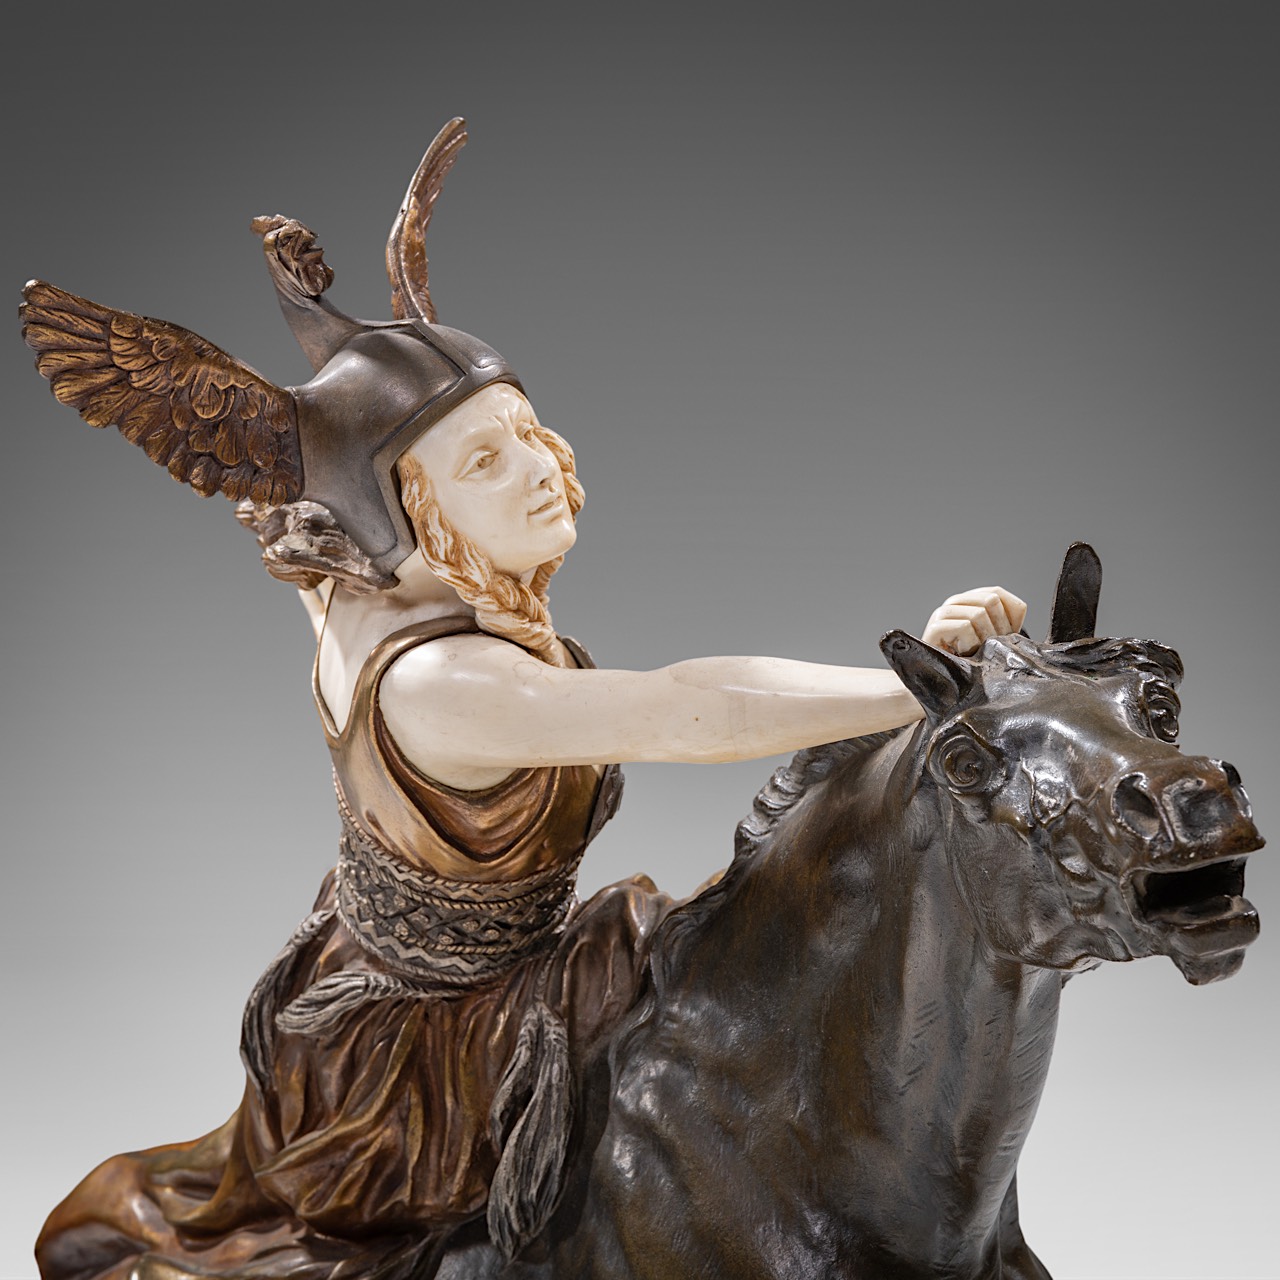 Claire Jeanne Roberte Colinet (1880-1950), 'Valkiria - Towards the Unknown', chryselephantine sculpt - Image 11 of 14